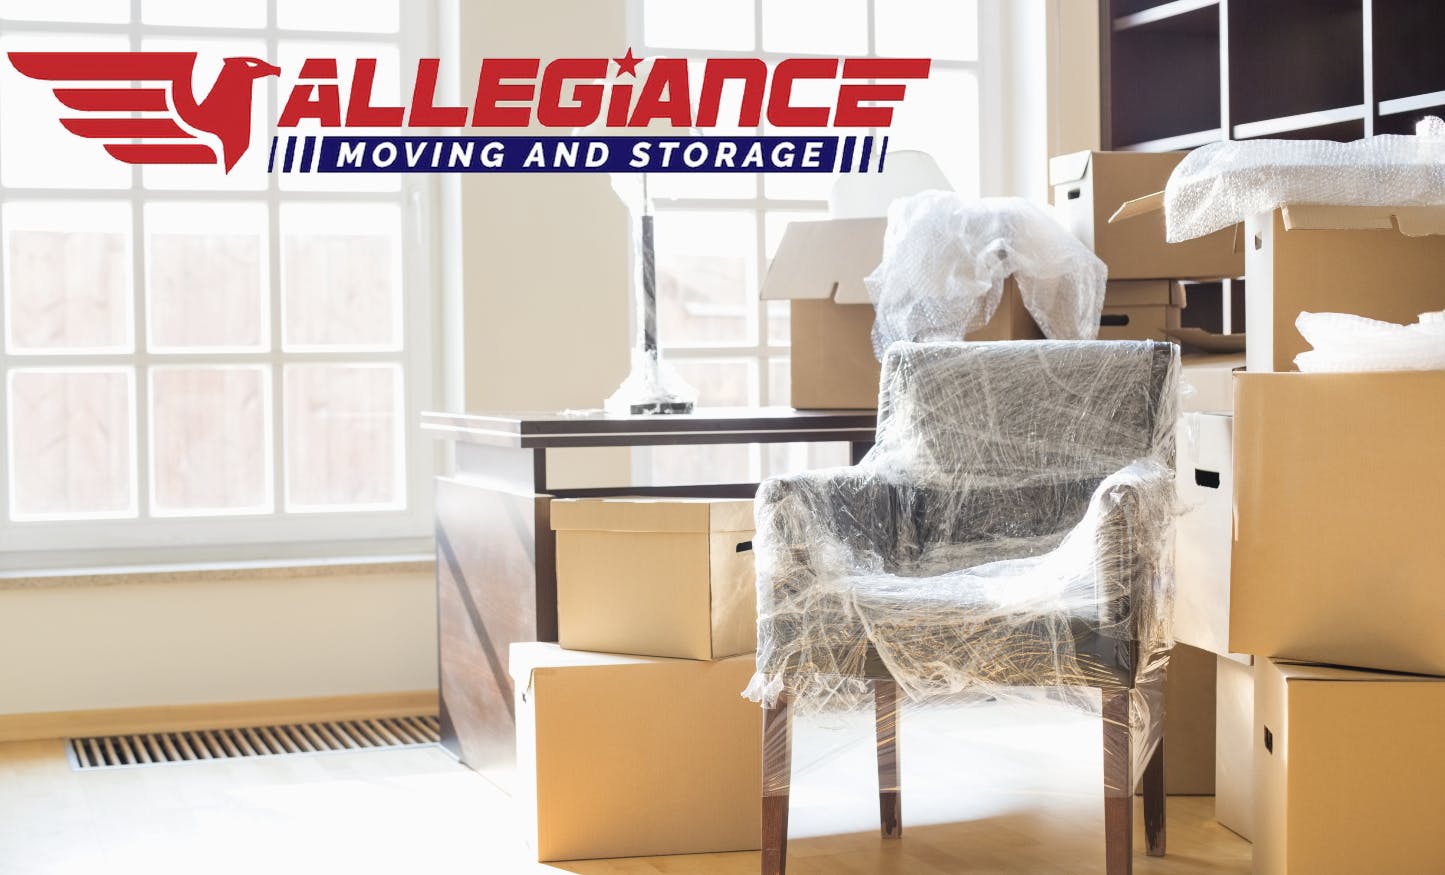 Allegiance Moving and Storage: Broker Service Review